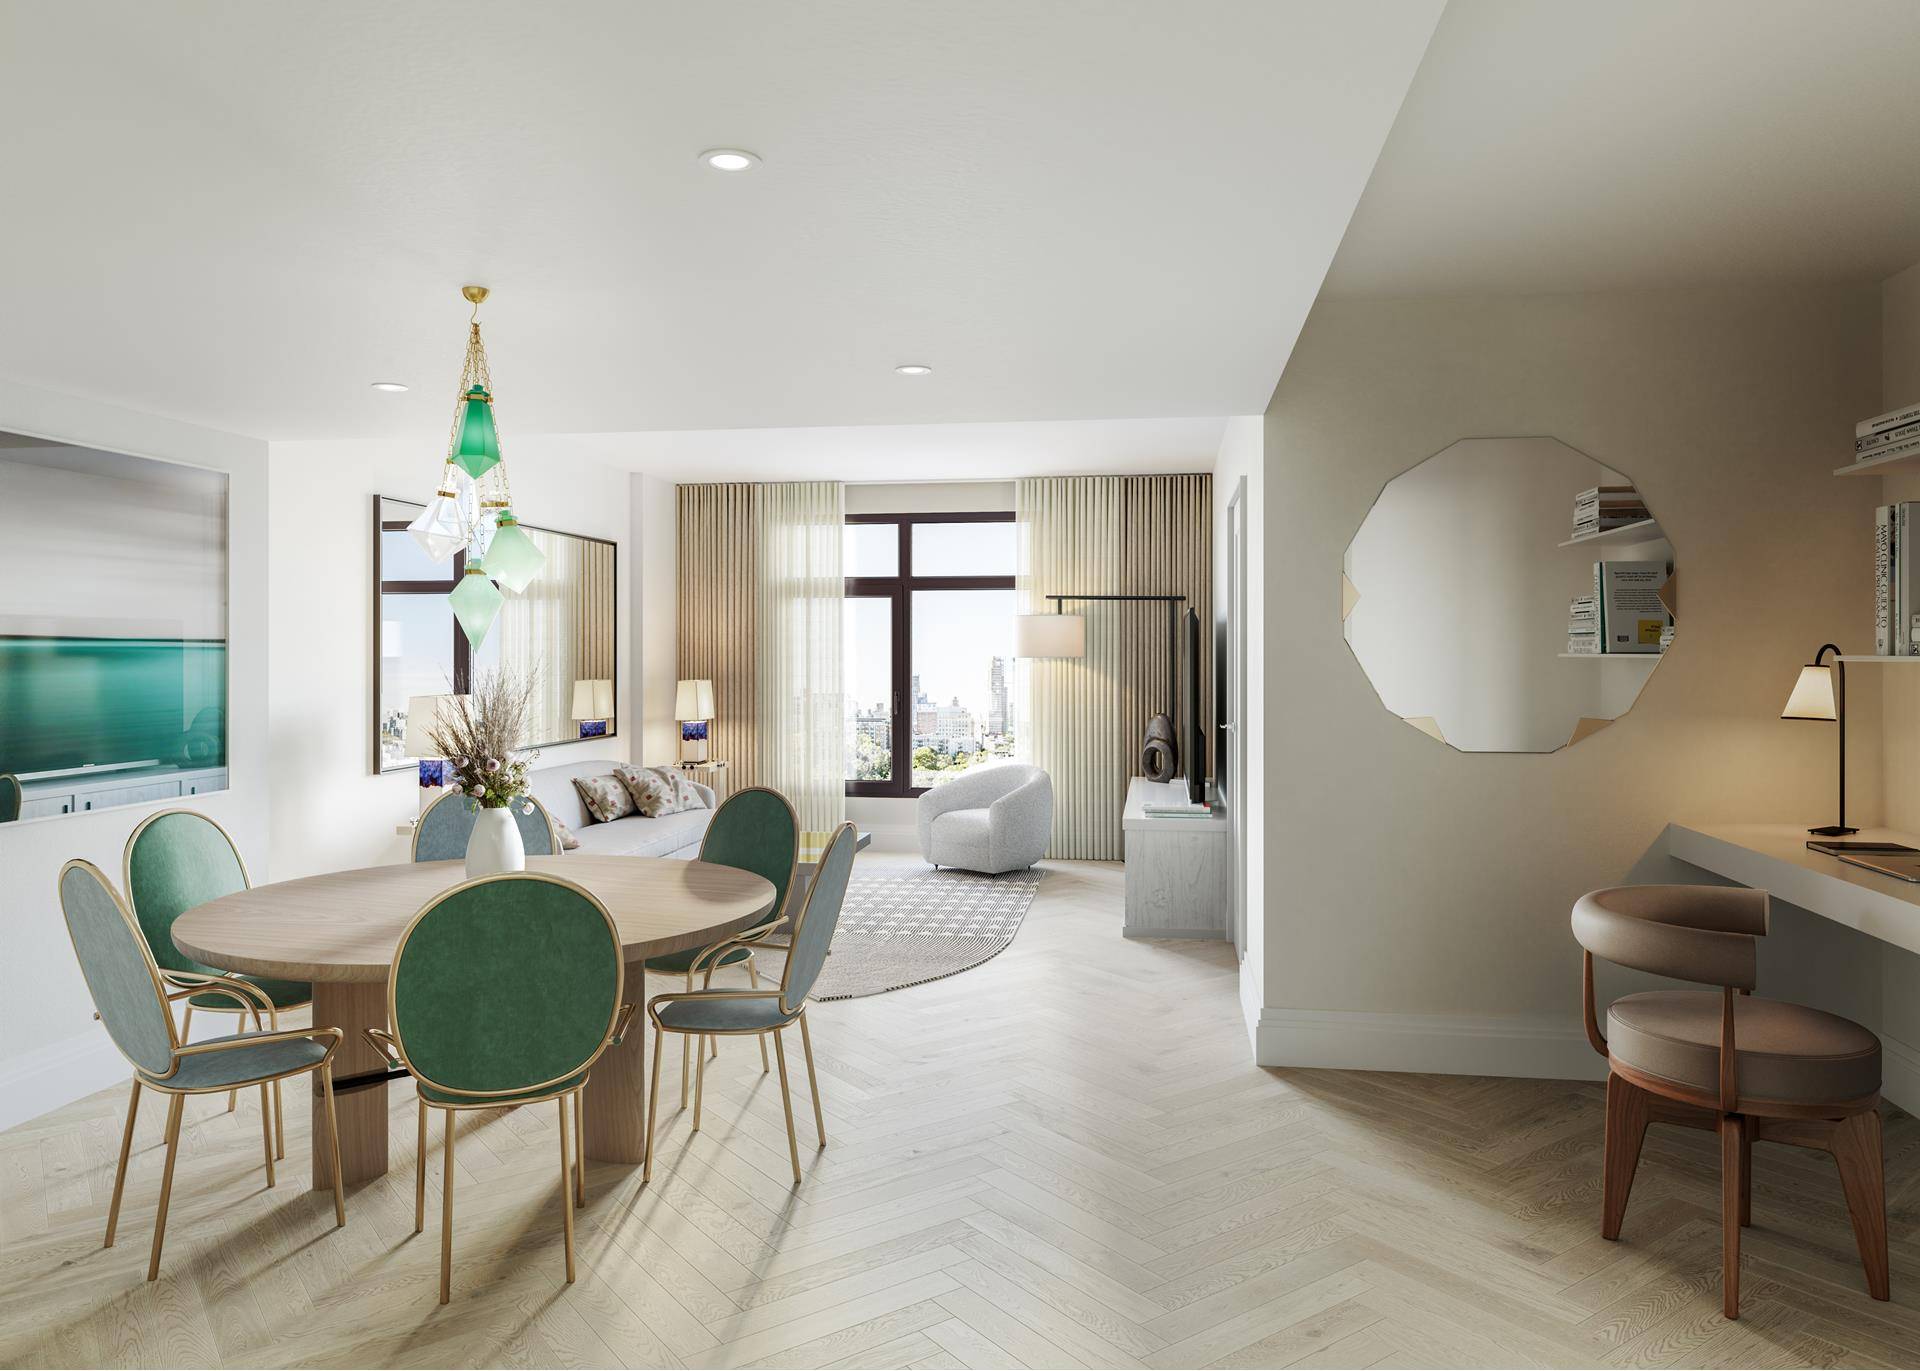 Sales Gallery Now Open By Appointment Introducing residence 7D at 300 West, an east facing studio offering an open concept living area that boasts custom White Oak herringbone flooring, central ...